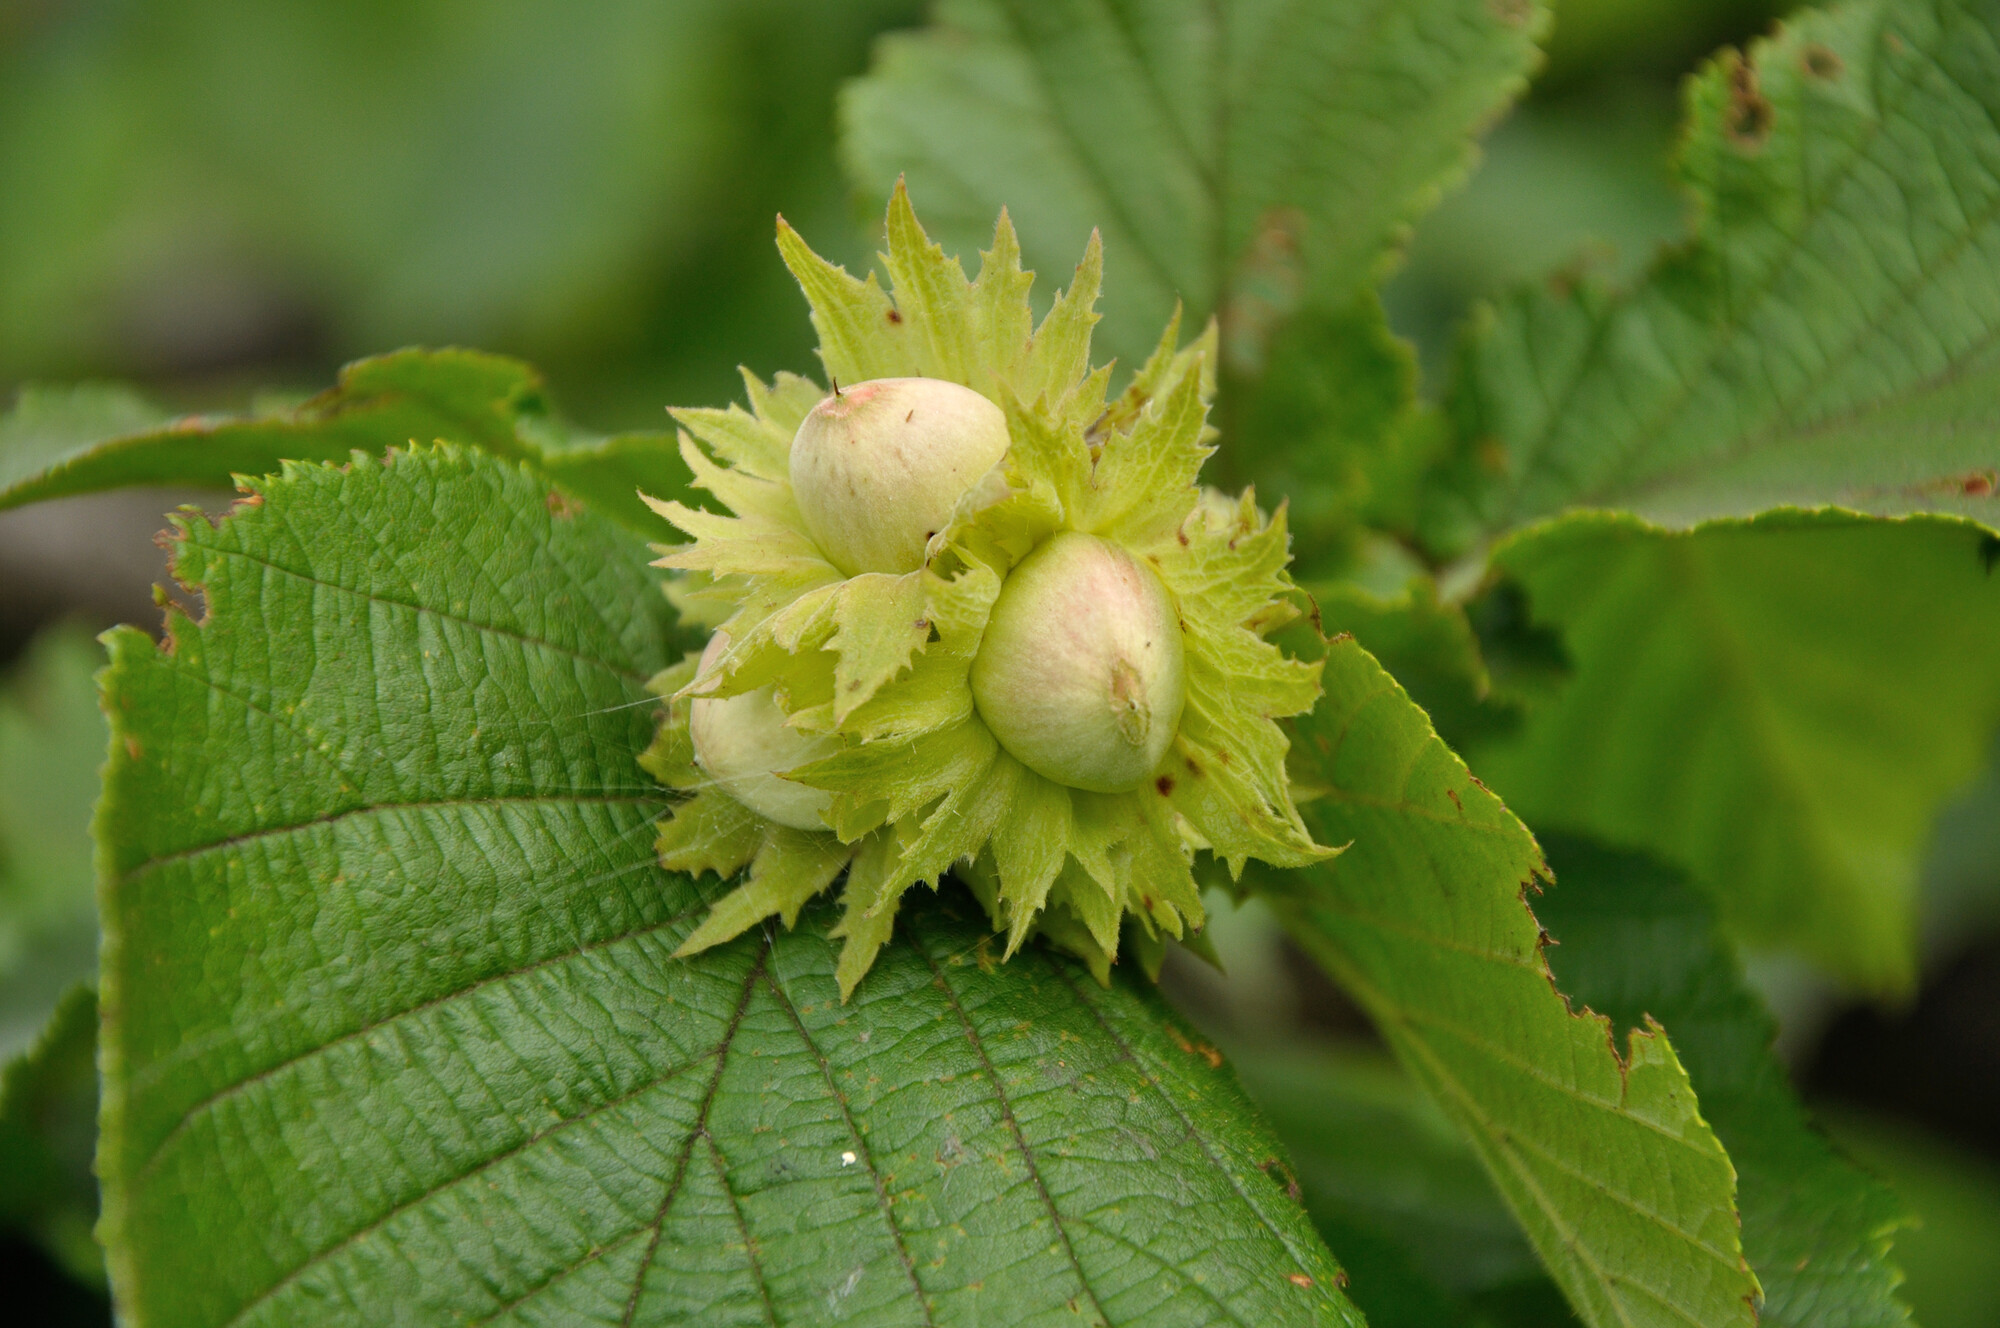 Young green hazelnuts surrounded by green leaves